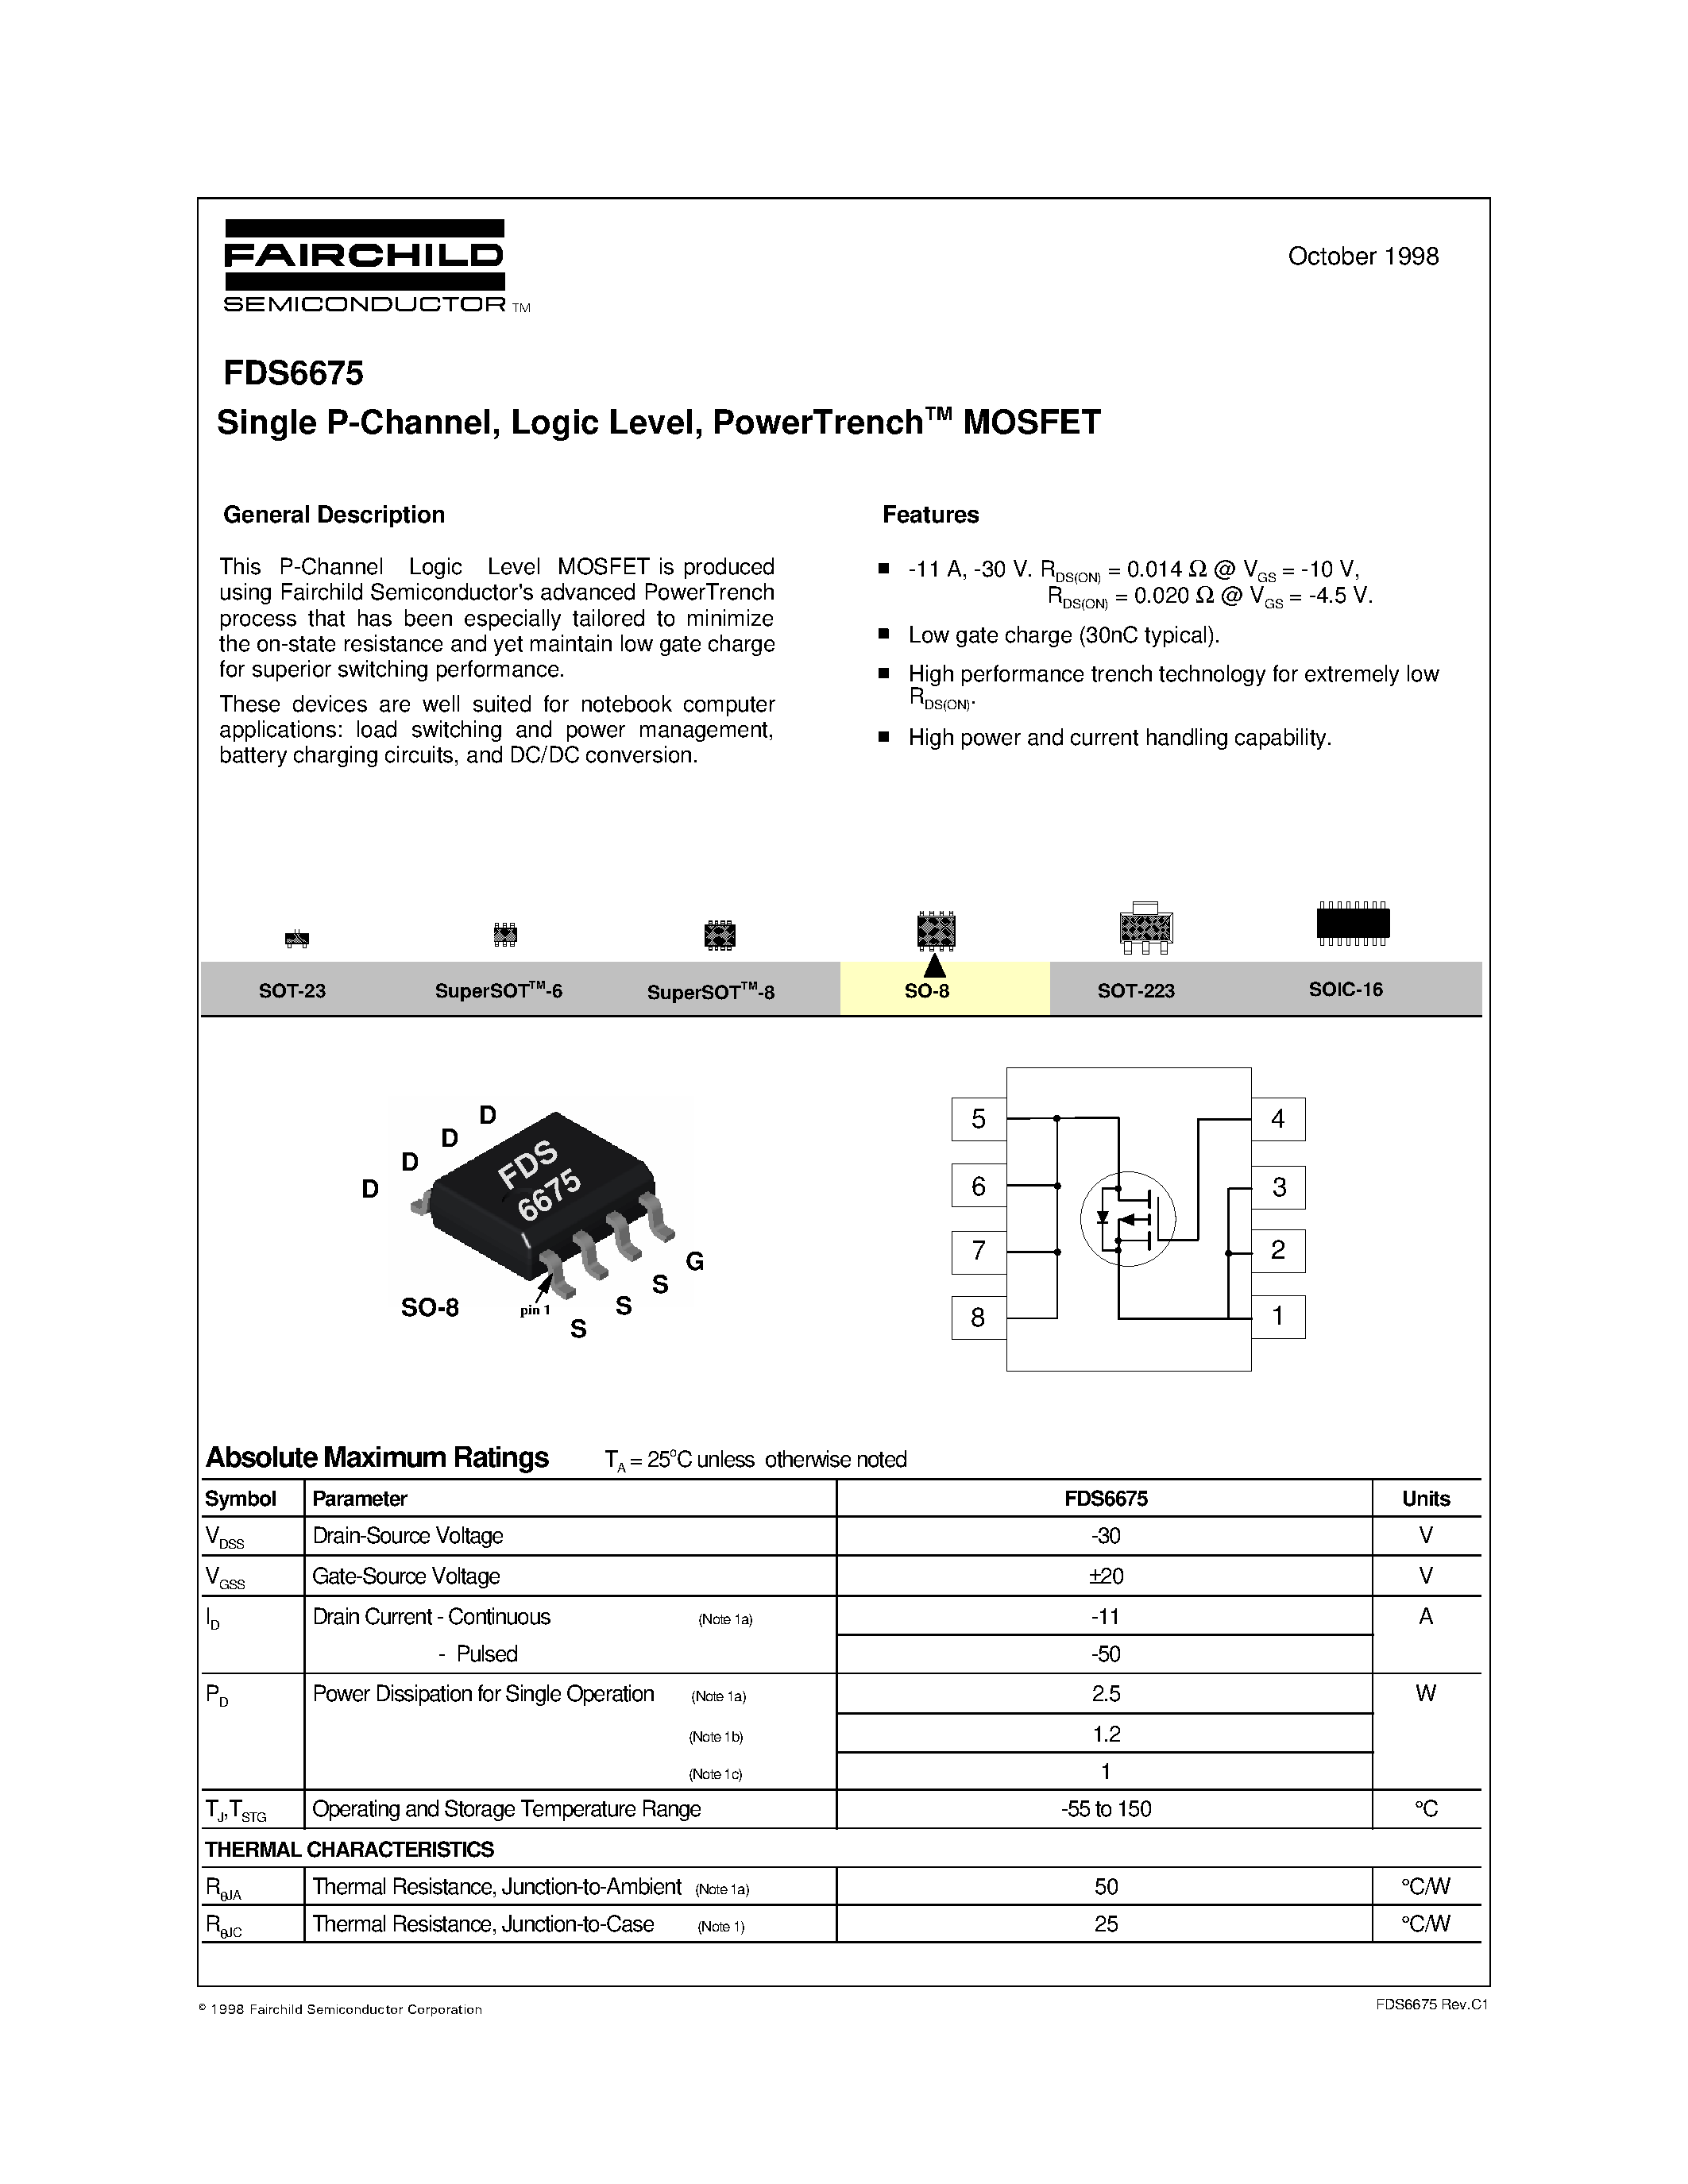 Datasheet FDS6675 - Single P-Channel/ Logic Level/ PowerTrenchTM MOSFET page 1